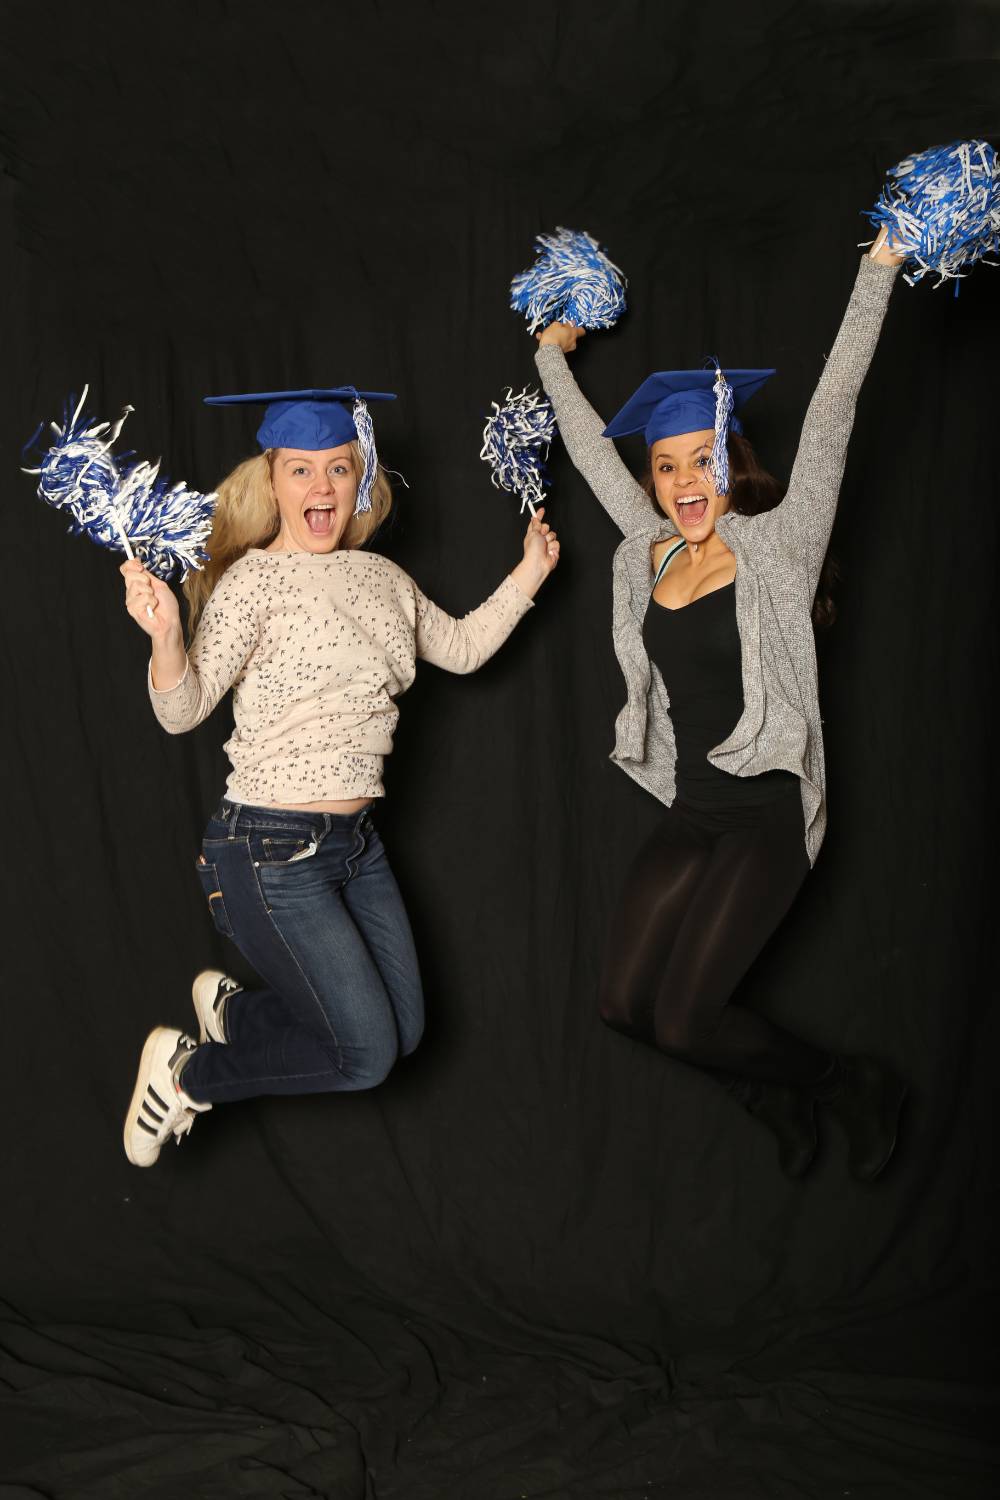 two friends jumping with pom poms